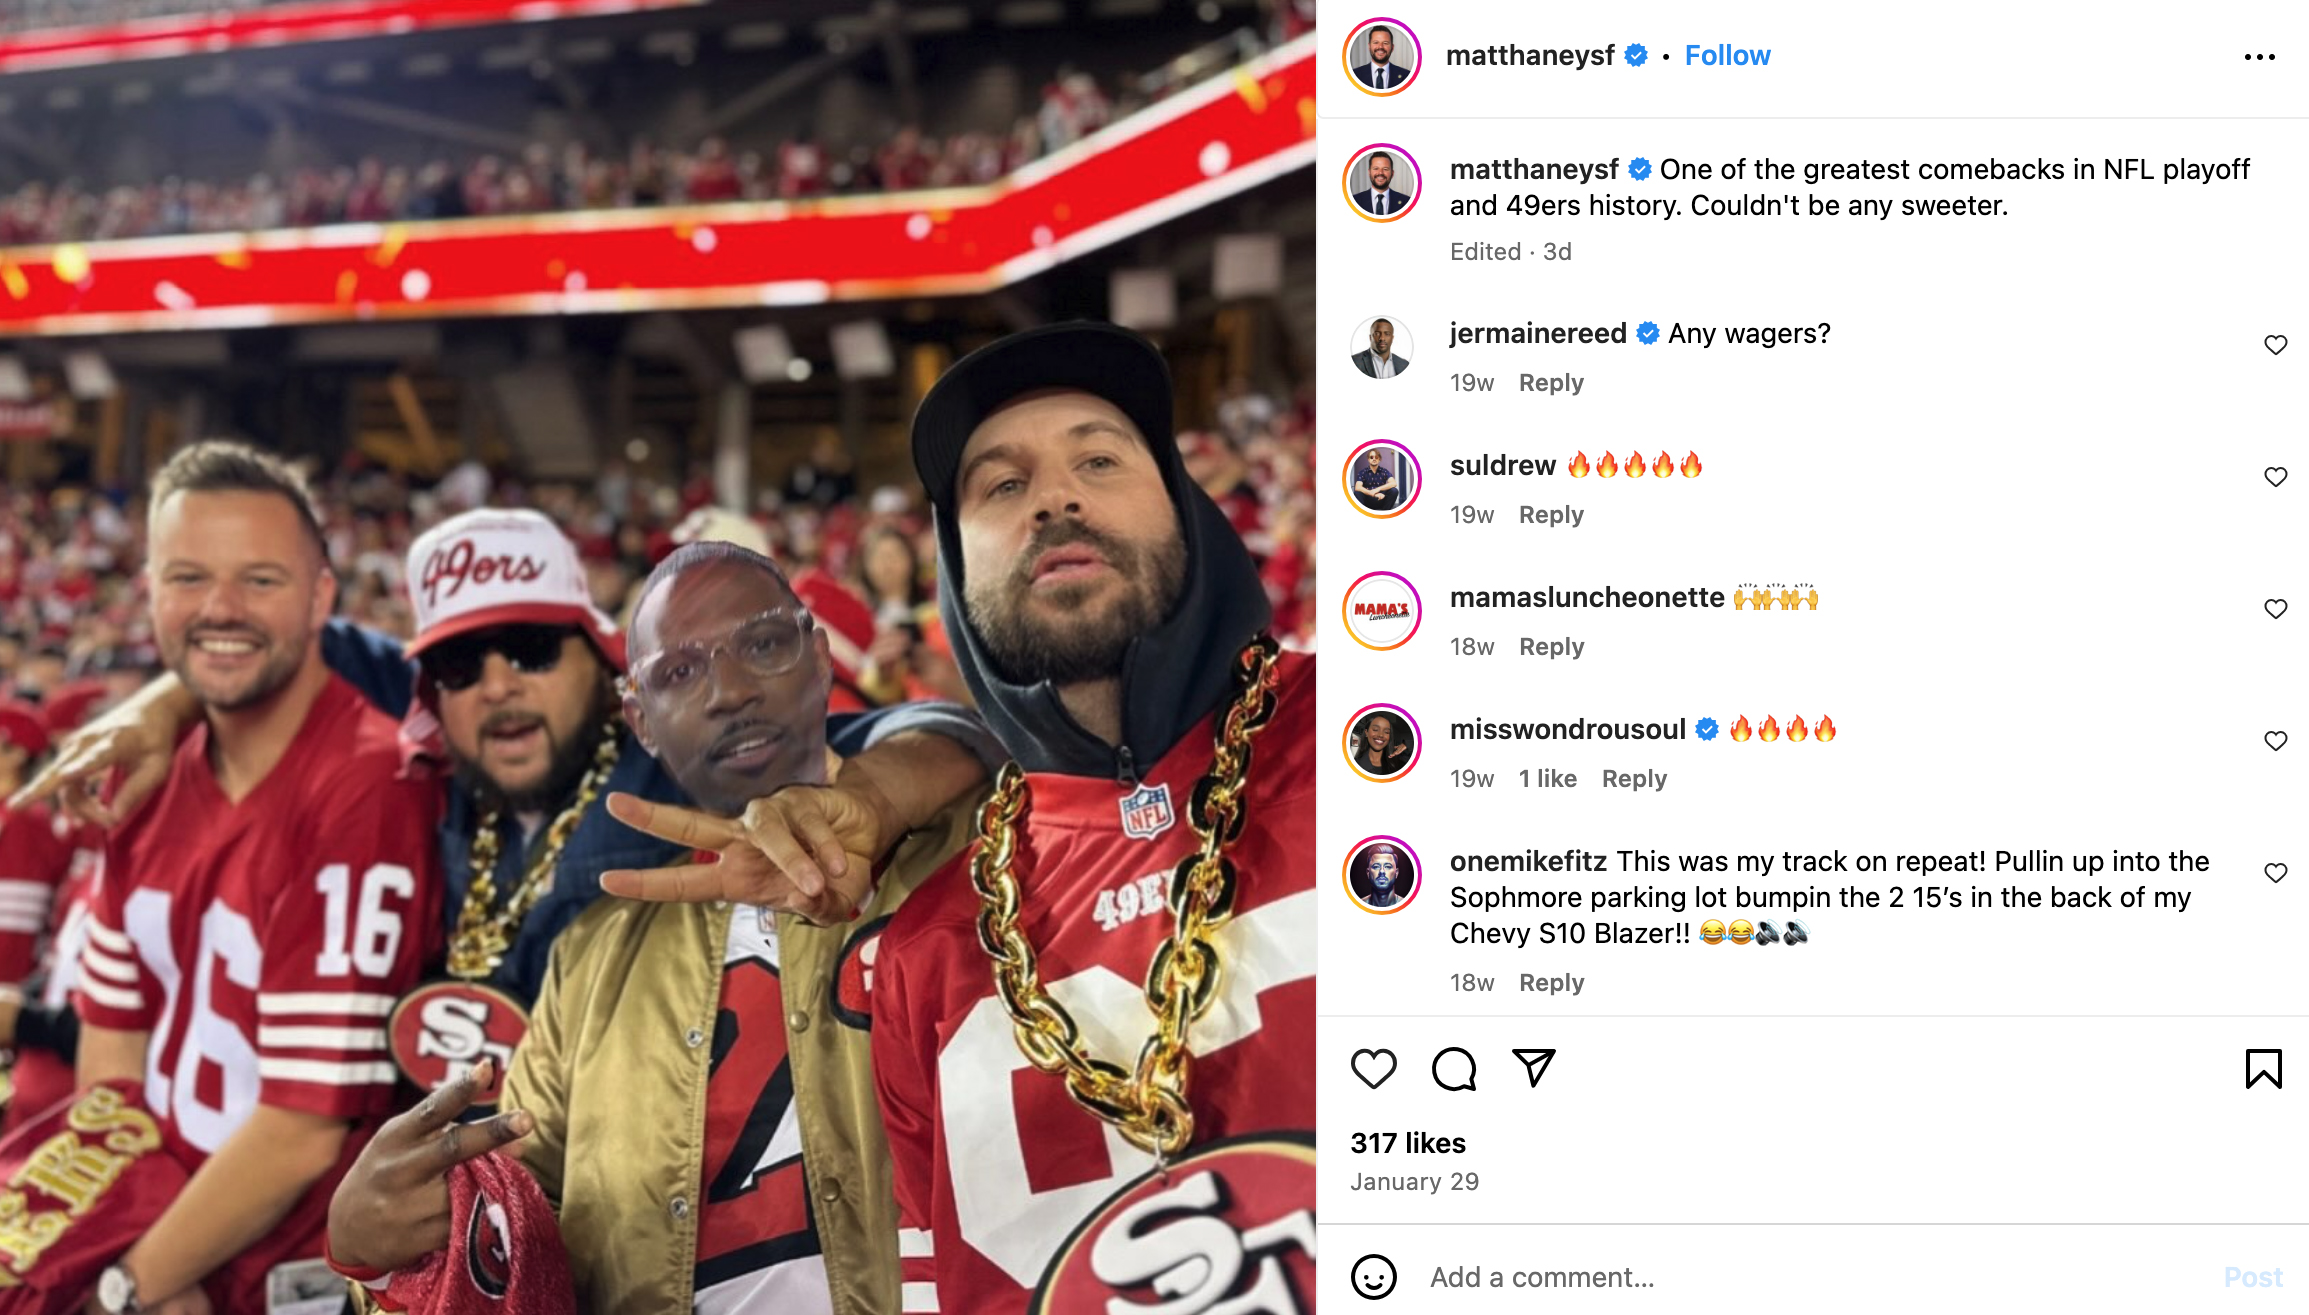 Four men dressed in San Francisco 49ers gear, including jerseys and hats, pose together in a stadium filled with cheering fans. They appear to be celebrating.